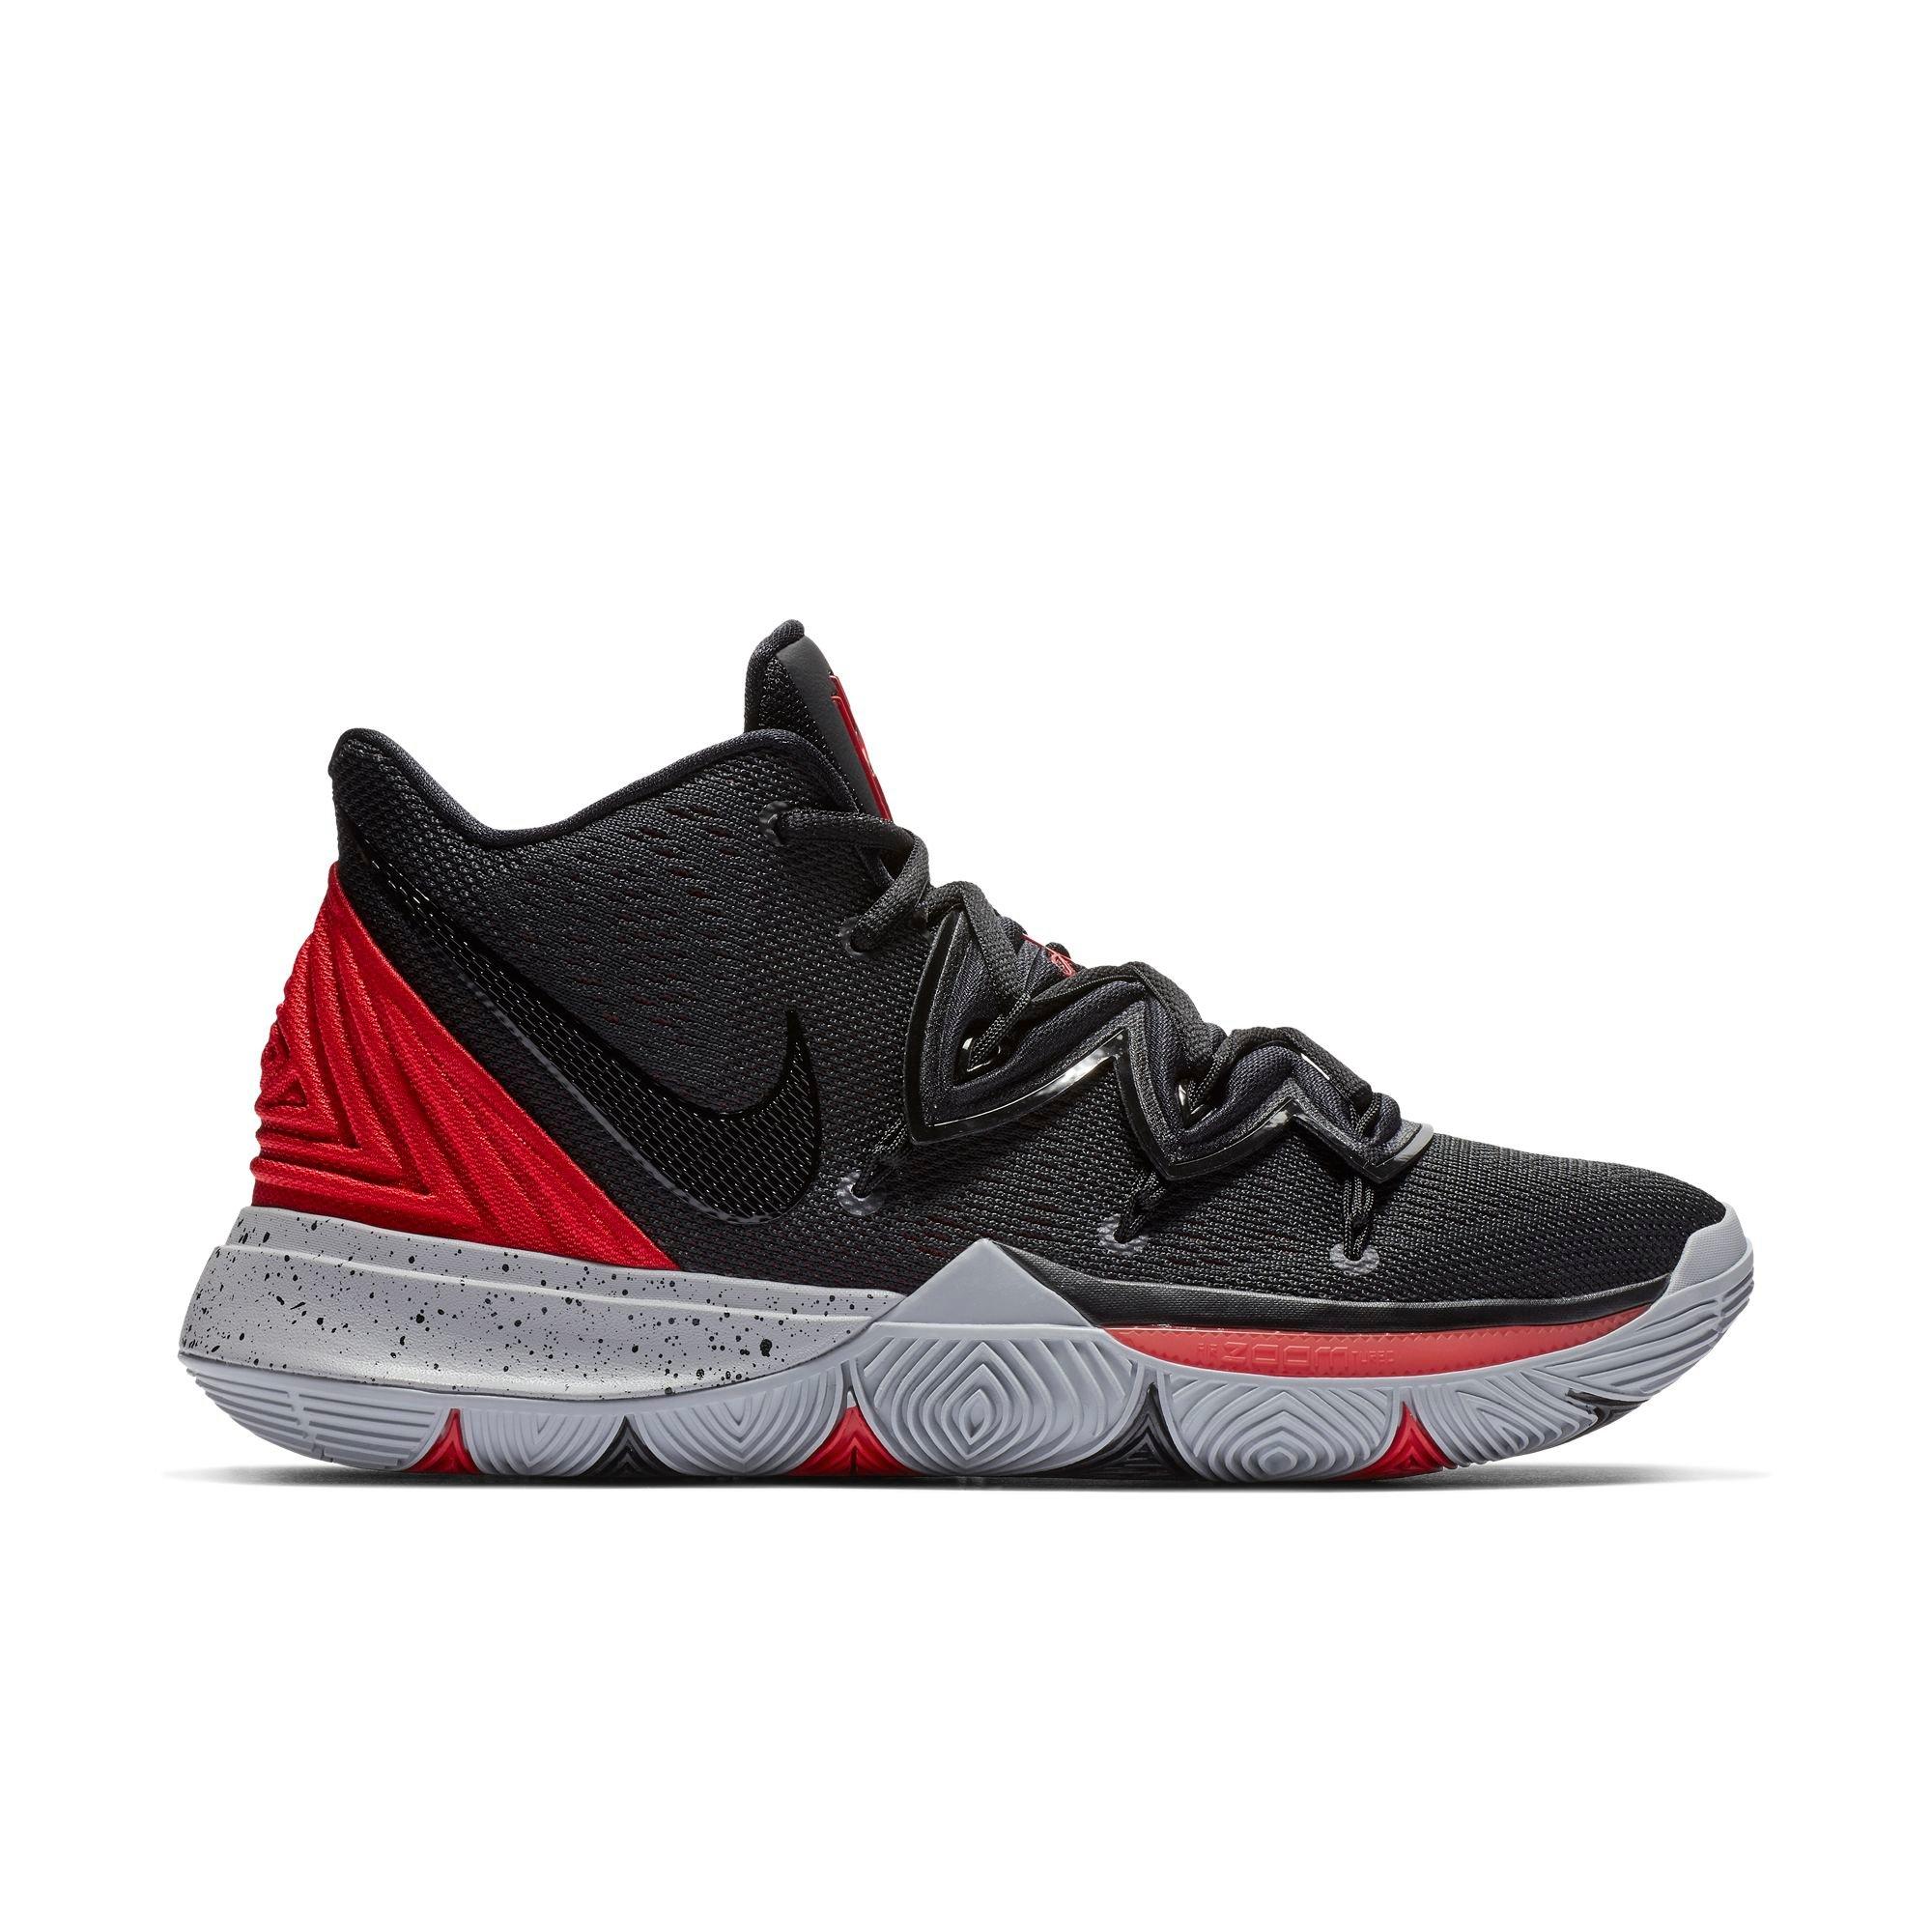 kyrie 5 university red and black